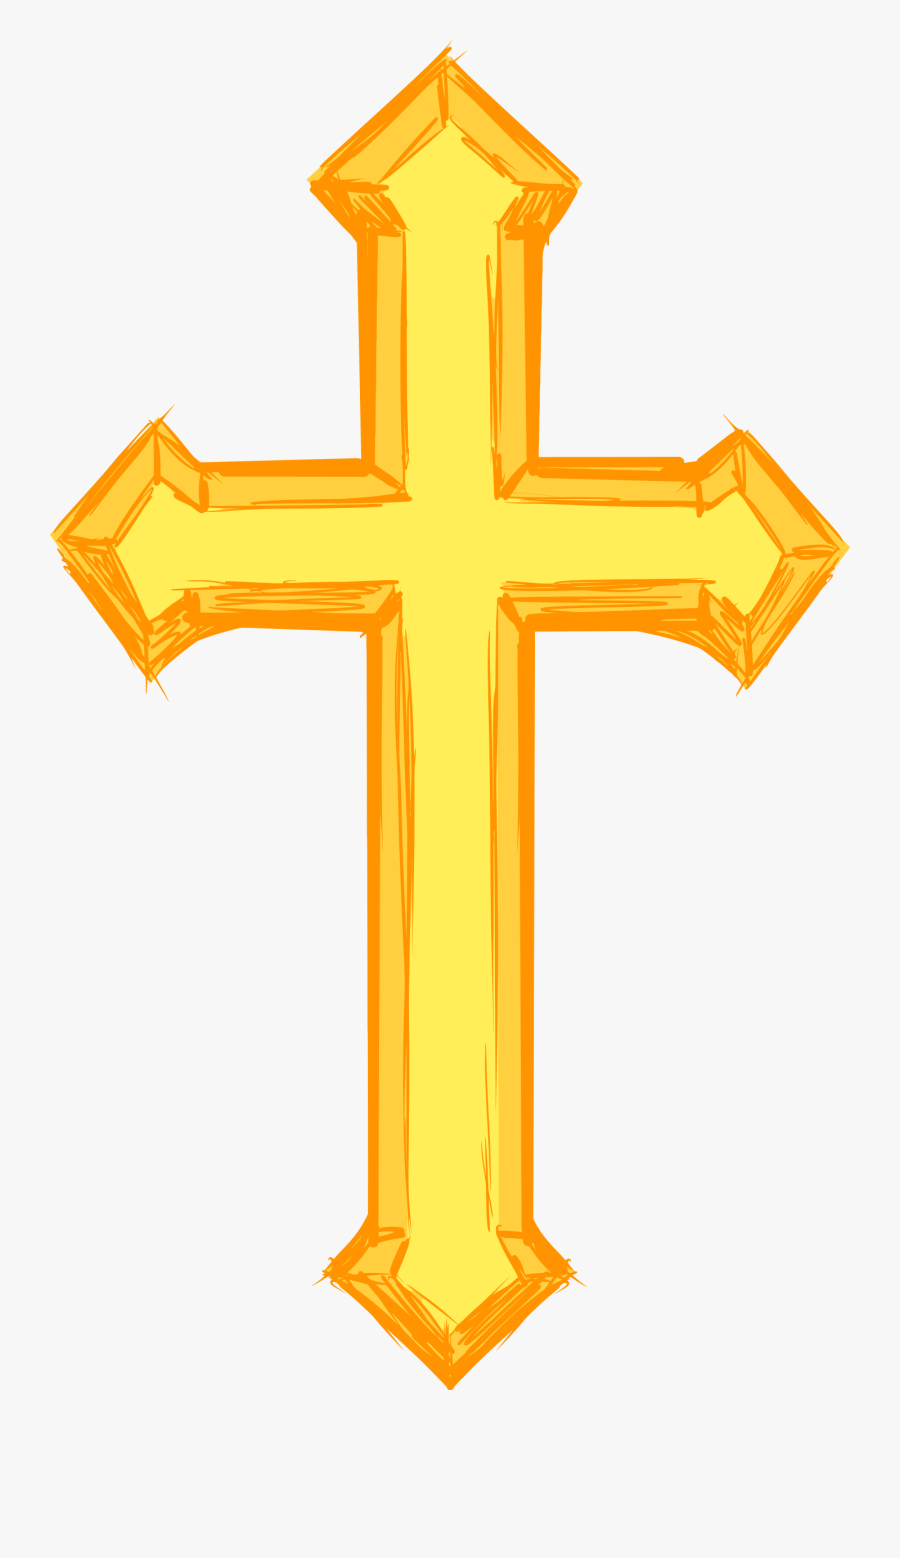 Christian Cross Crucifix Adult Support Group Christianity - Cross Image In Colour, Transparent Clipart